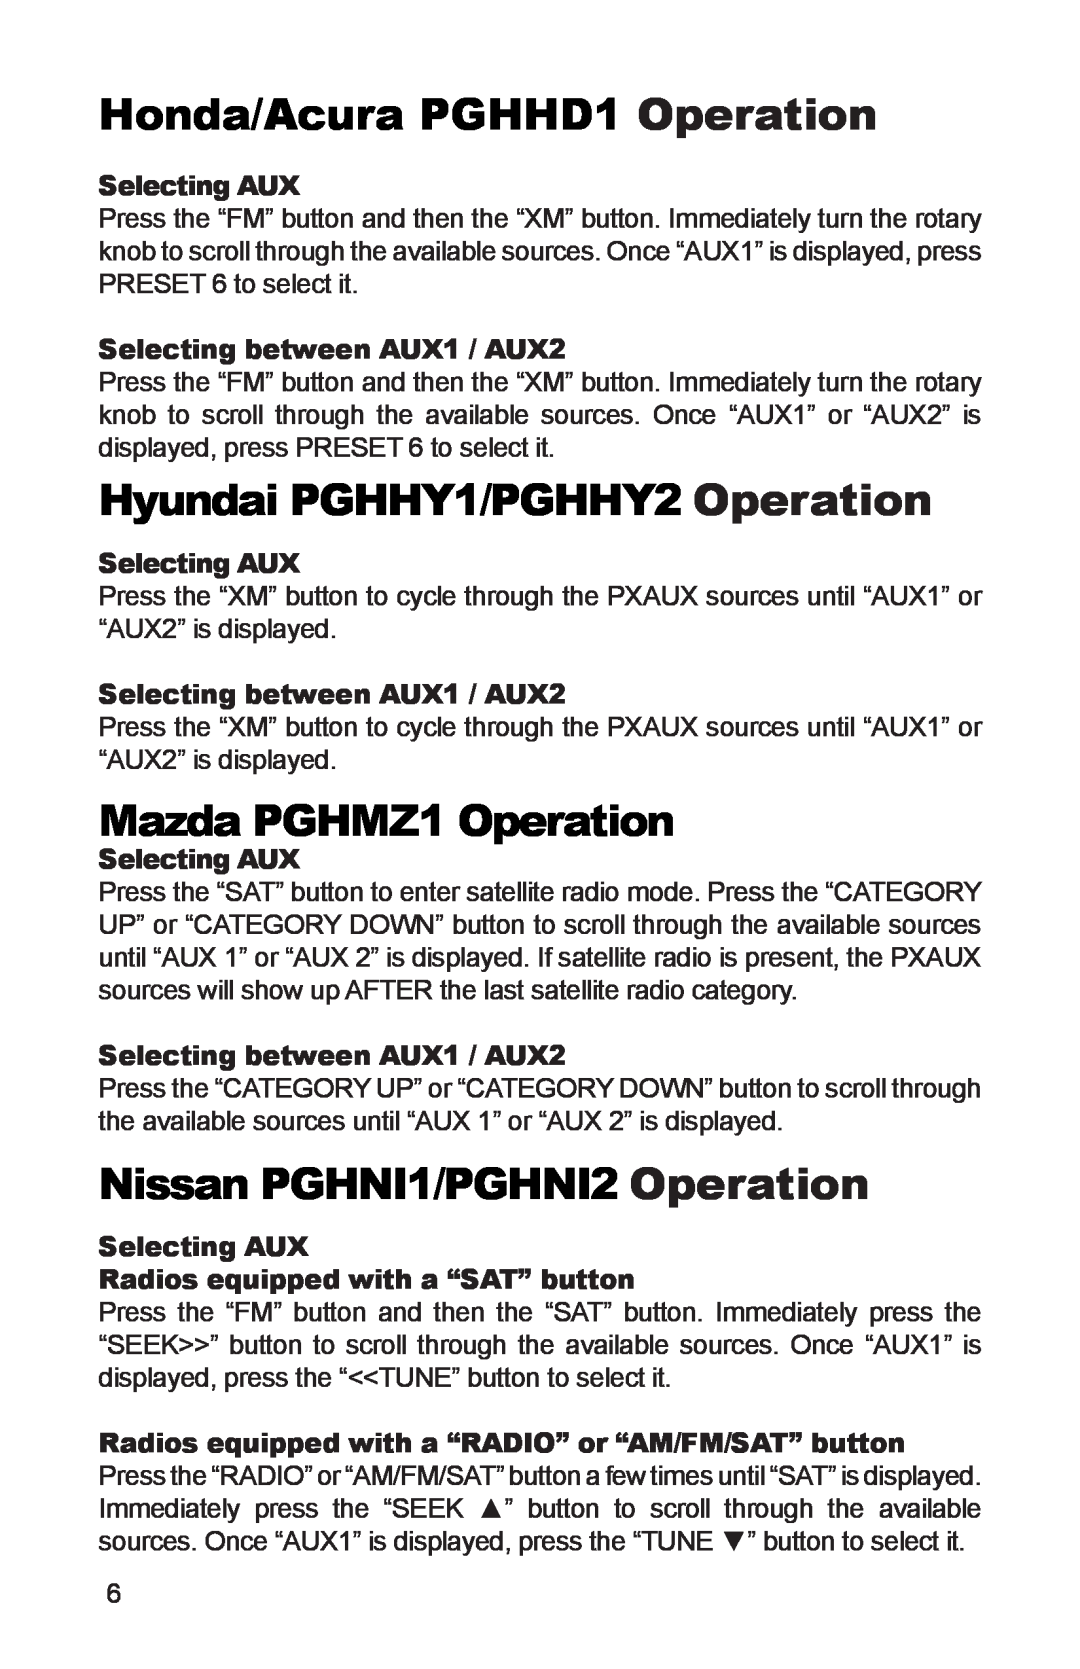 iSimple PGHGM2 Honda/Acura PGHHD1 Operation, Hyundai PGHHY1/PGHHY2 Operation, Mazda PGHMZ1 Operation, Selecting AUX 